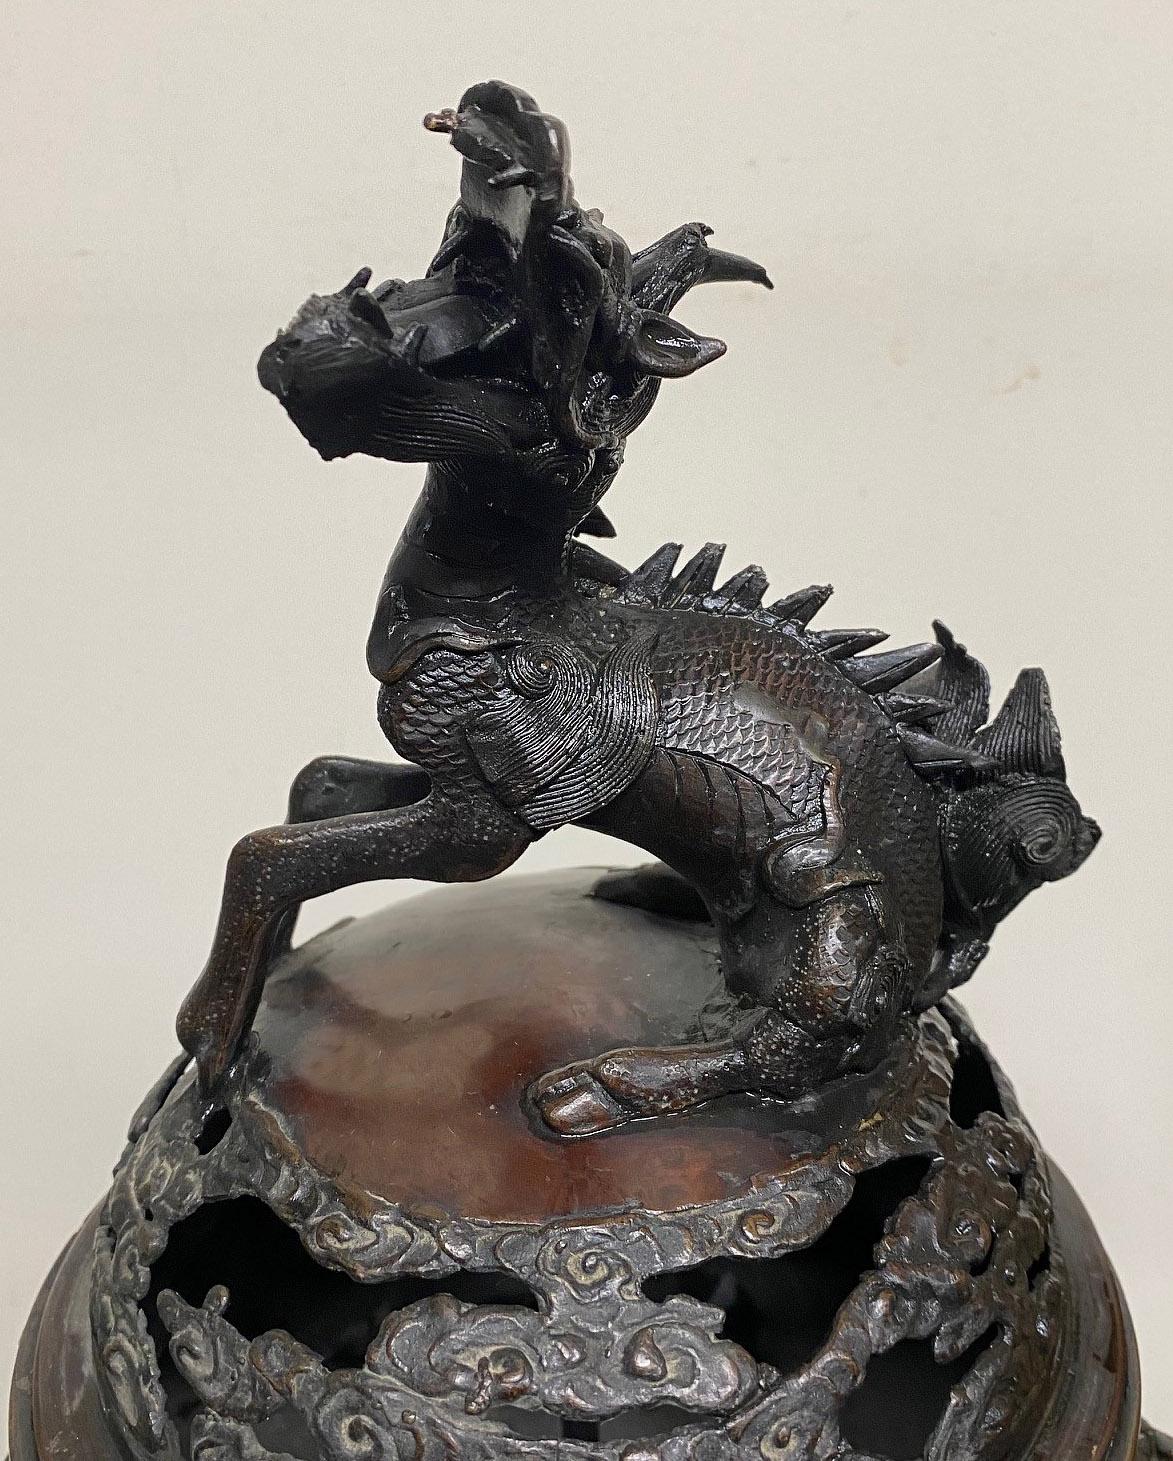 Late 19th/early 20th century Japanese bronze incense burner or cachepot

The cover decorated with a large dragon, the base designed with flowers and birds. There are handles to each side, standing on three legs.